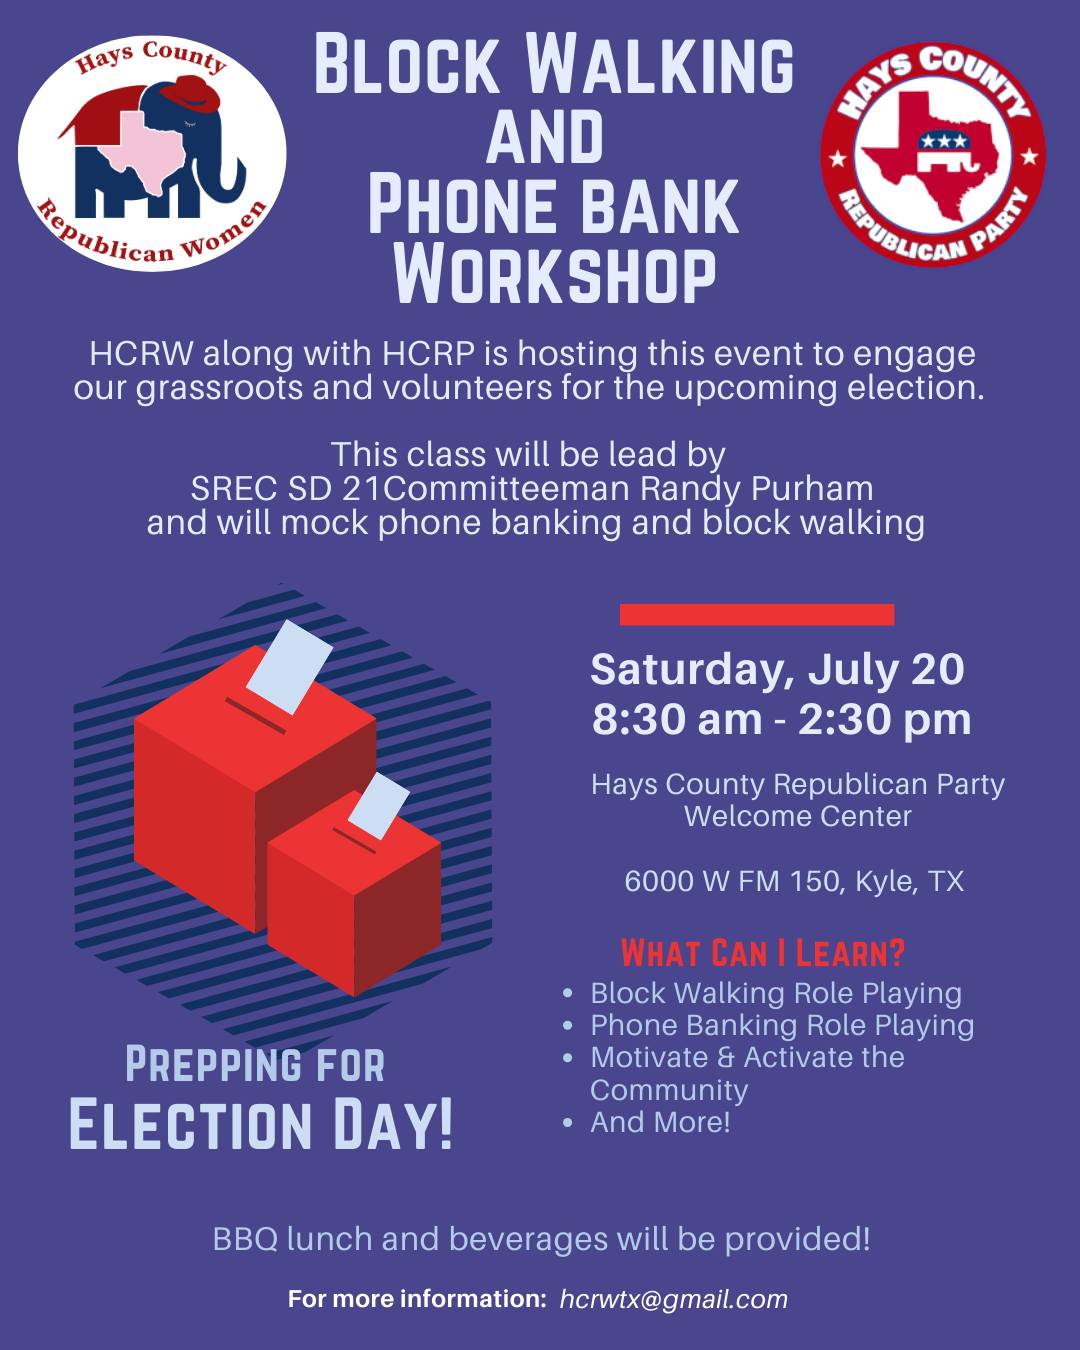 HCRP & HCRW: Block Walking and Phone Bank Workshop @ Hays County Republican Party Welcome Center